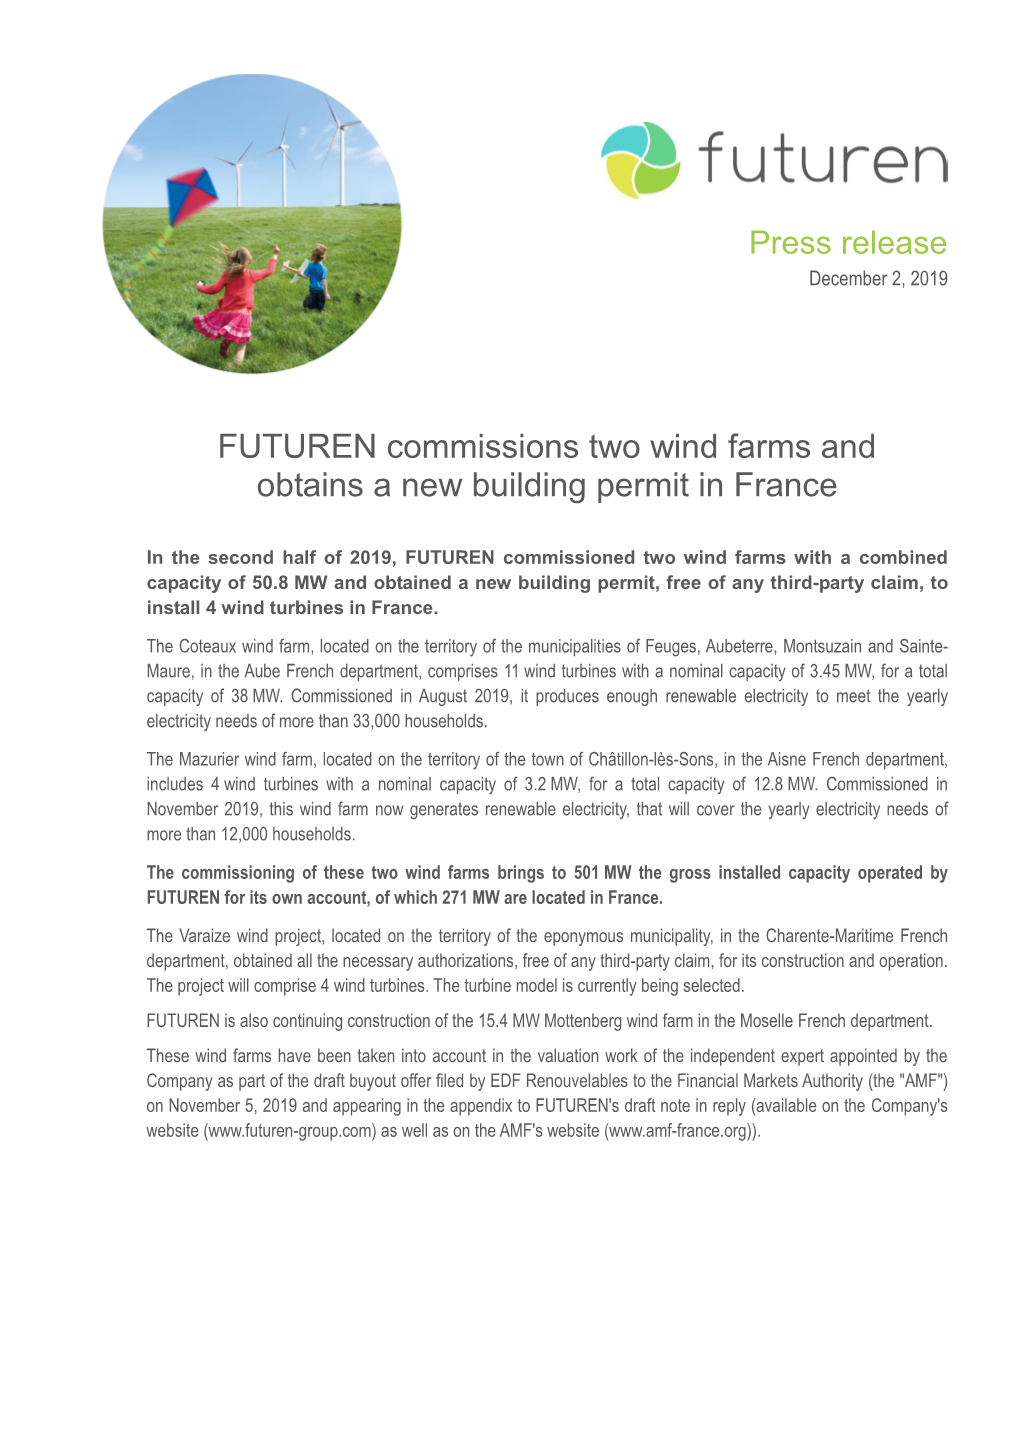 FUTUREN Commissions Two Wind Farms and Obtains a New Building Permit in France